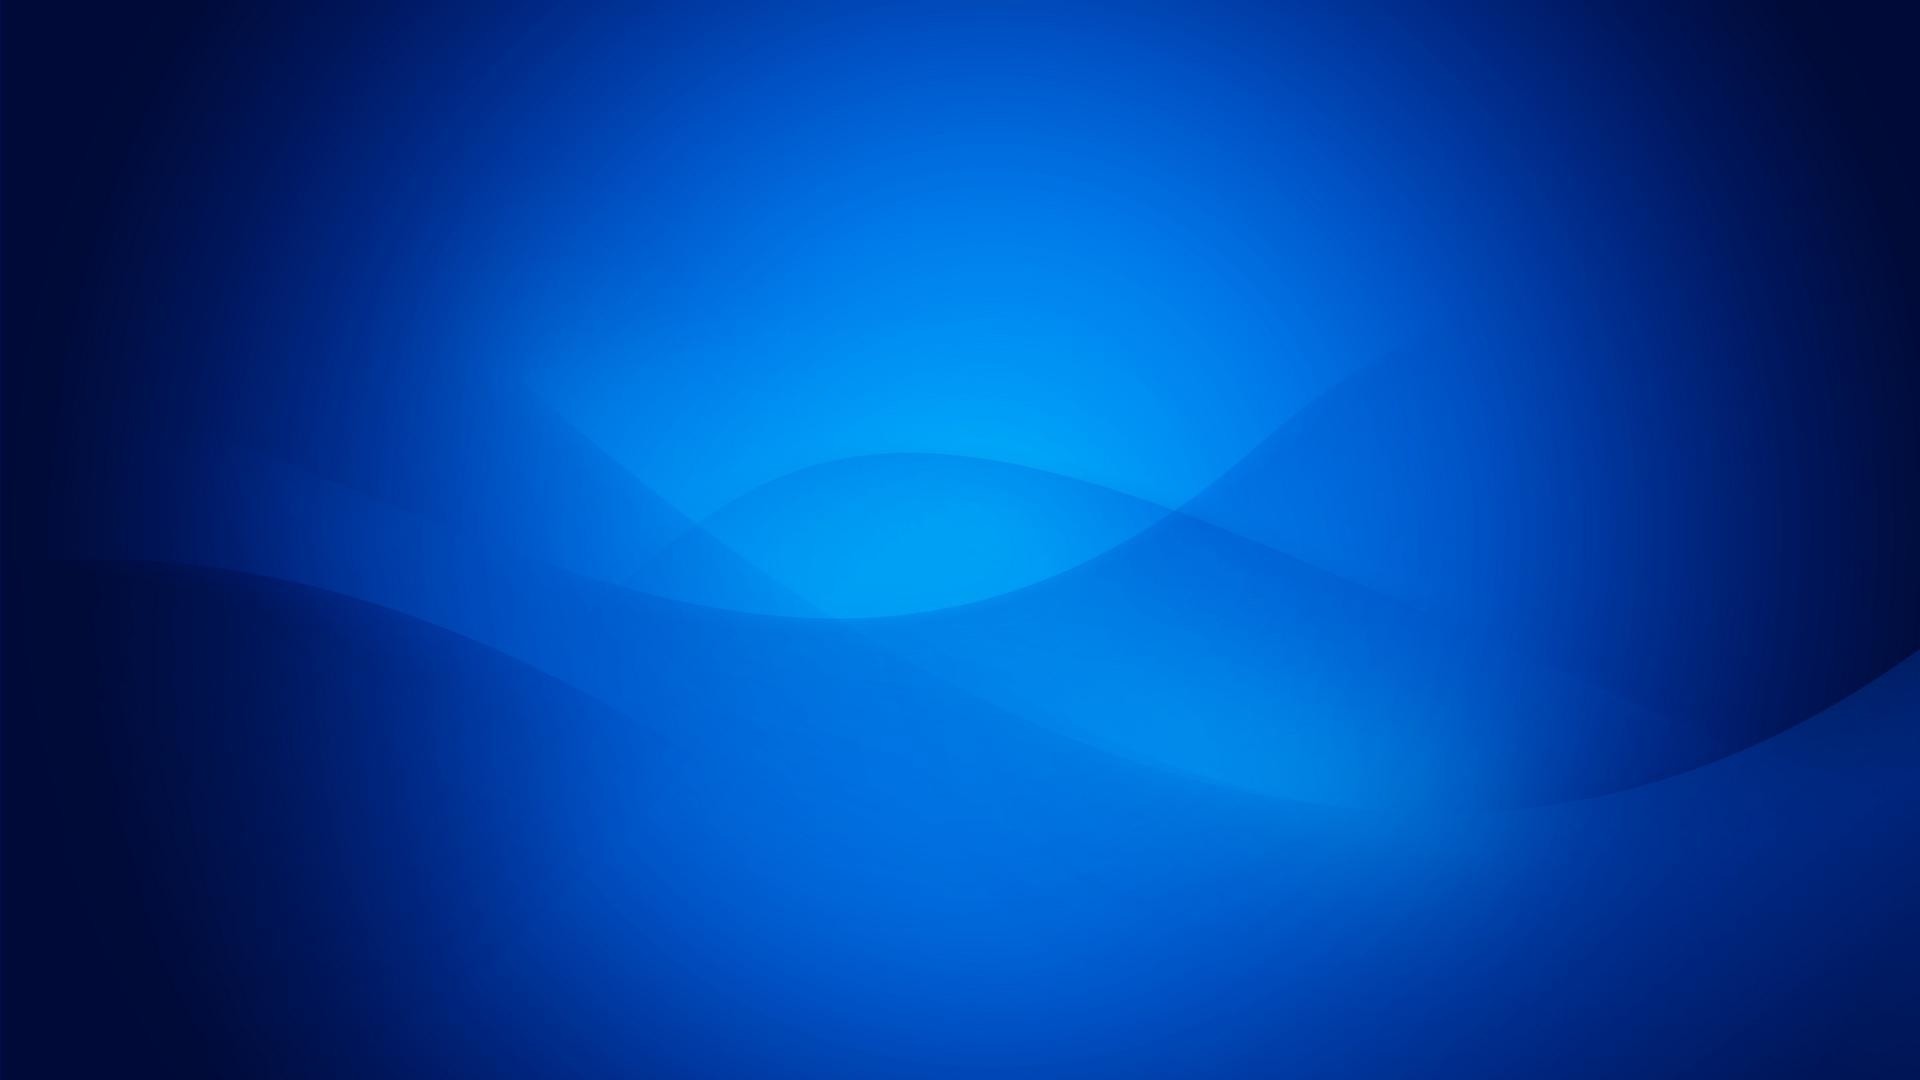 1920x1080 Blue Wallpaper For Background 15